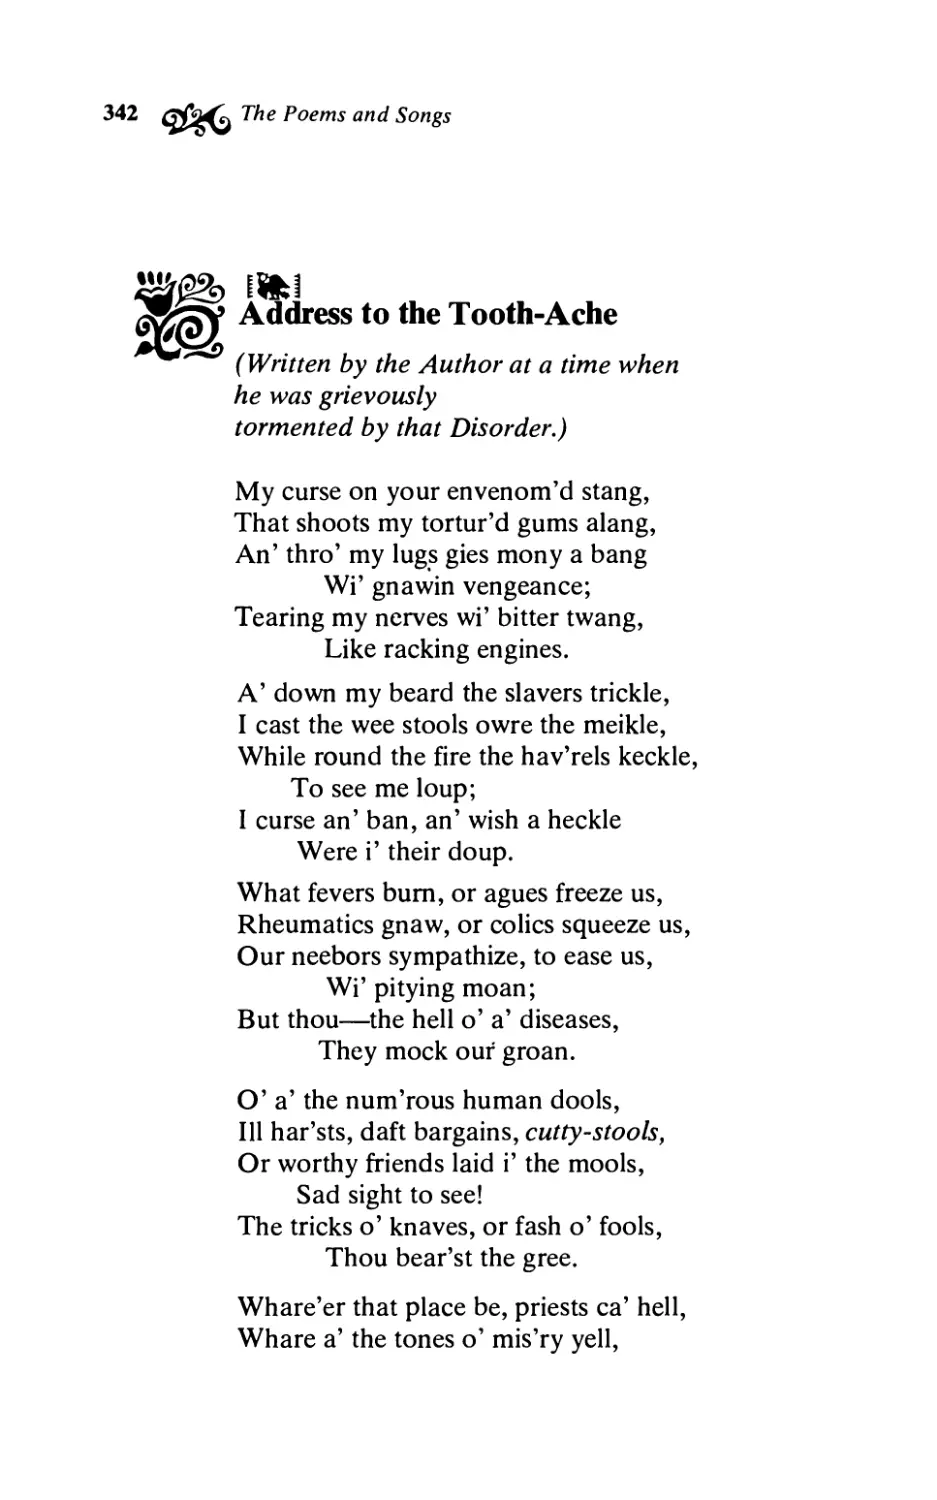 Address to the Tooth-Ache